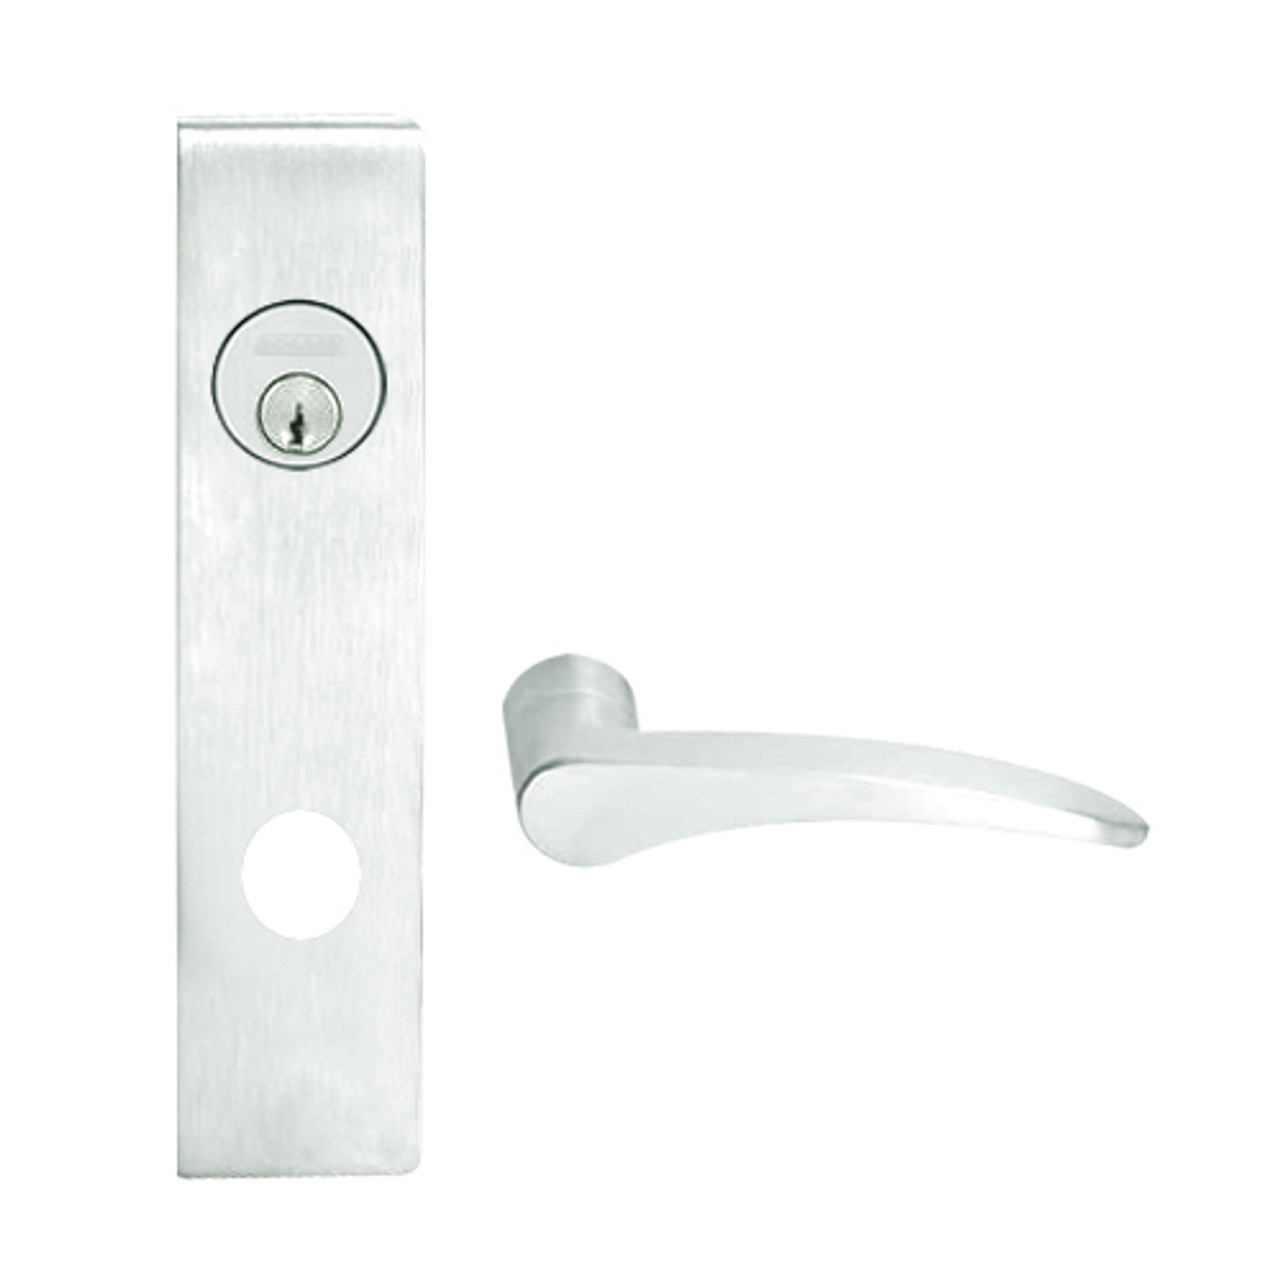 L9456L-12L-619-RH Schlage L Series Less Cylinder Corridor with Deadbolt Commercial Mortise Lock with 12 Cast Lever Design in Satin Nickel